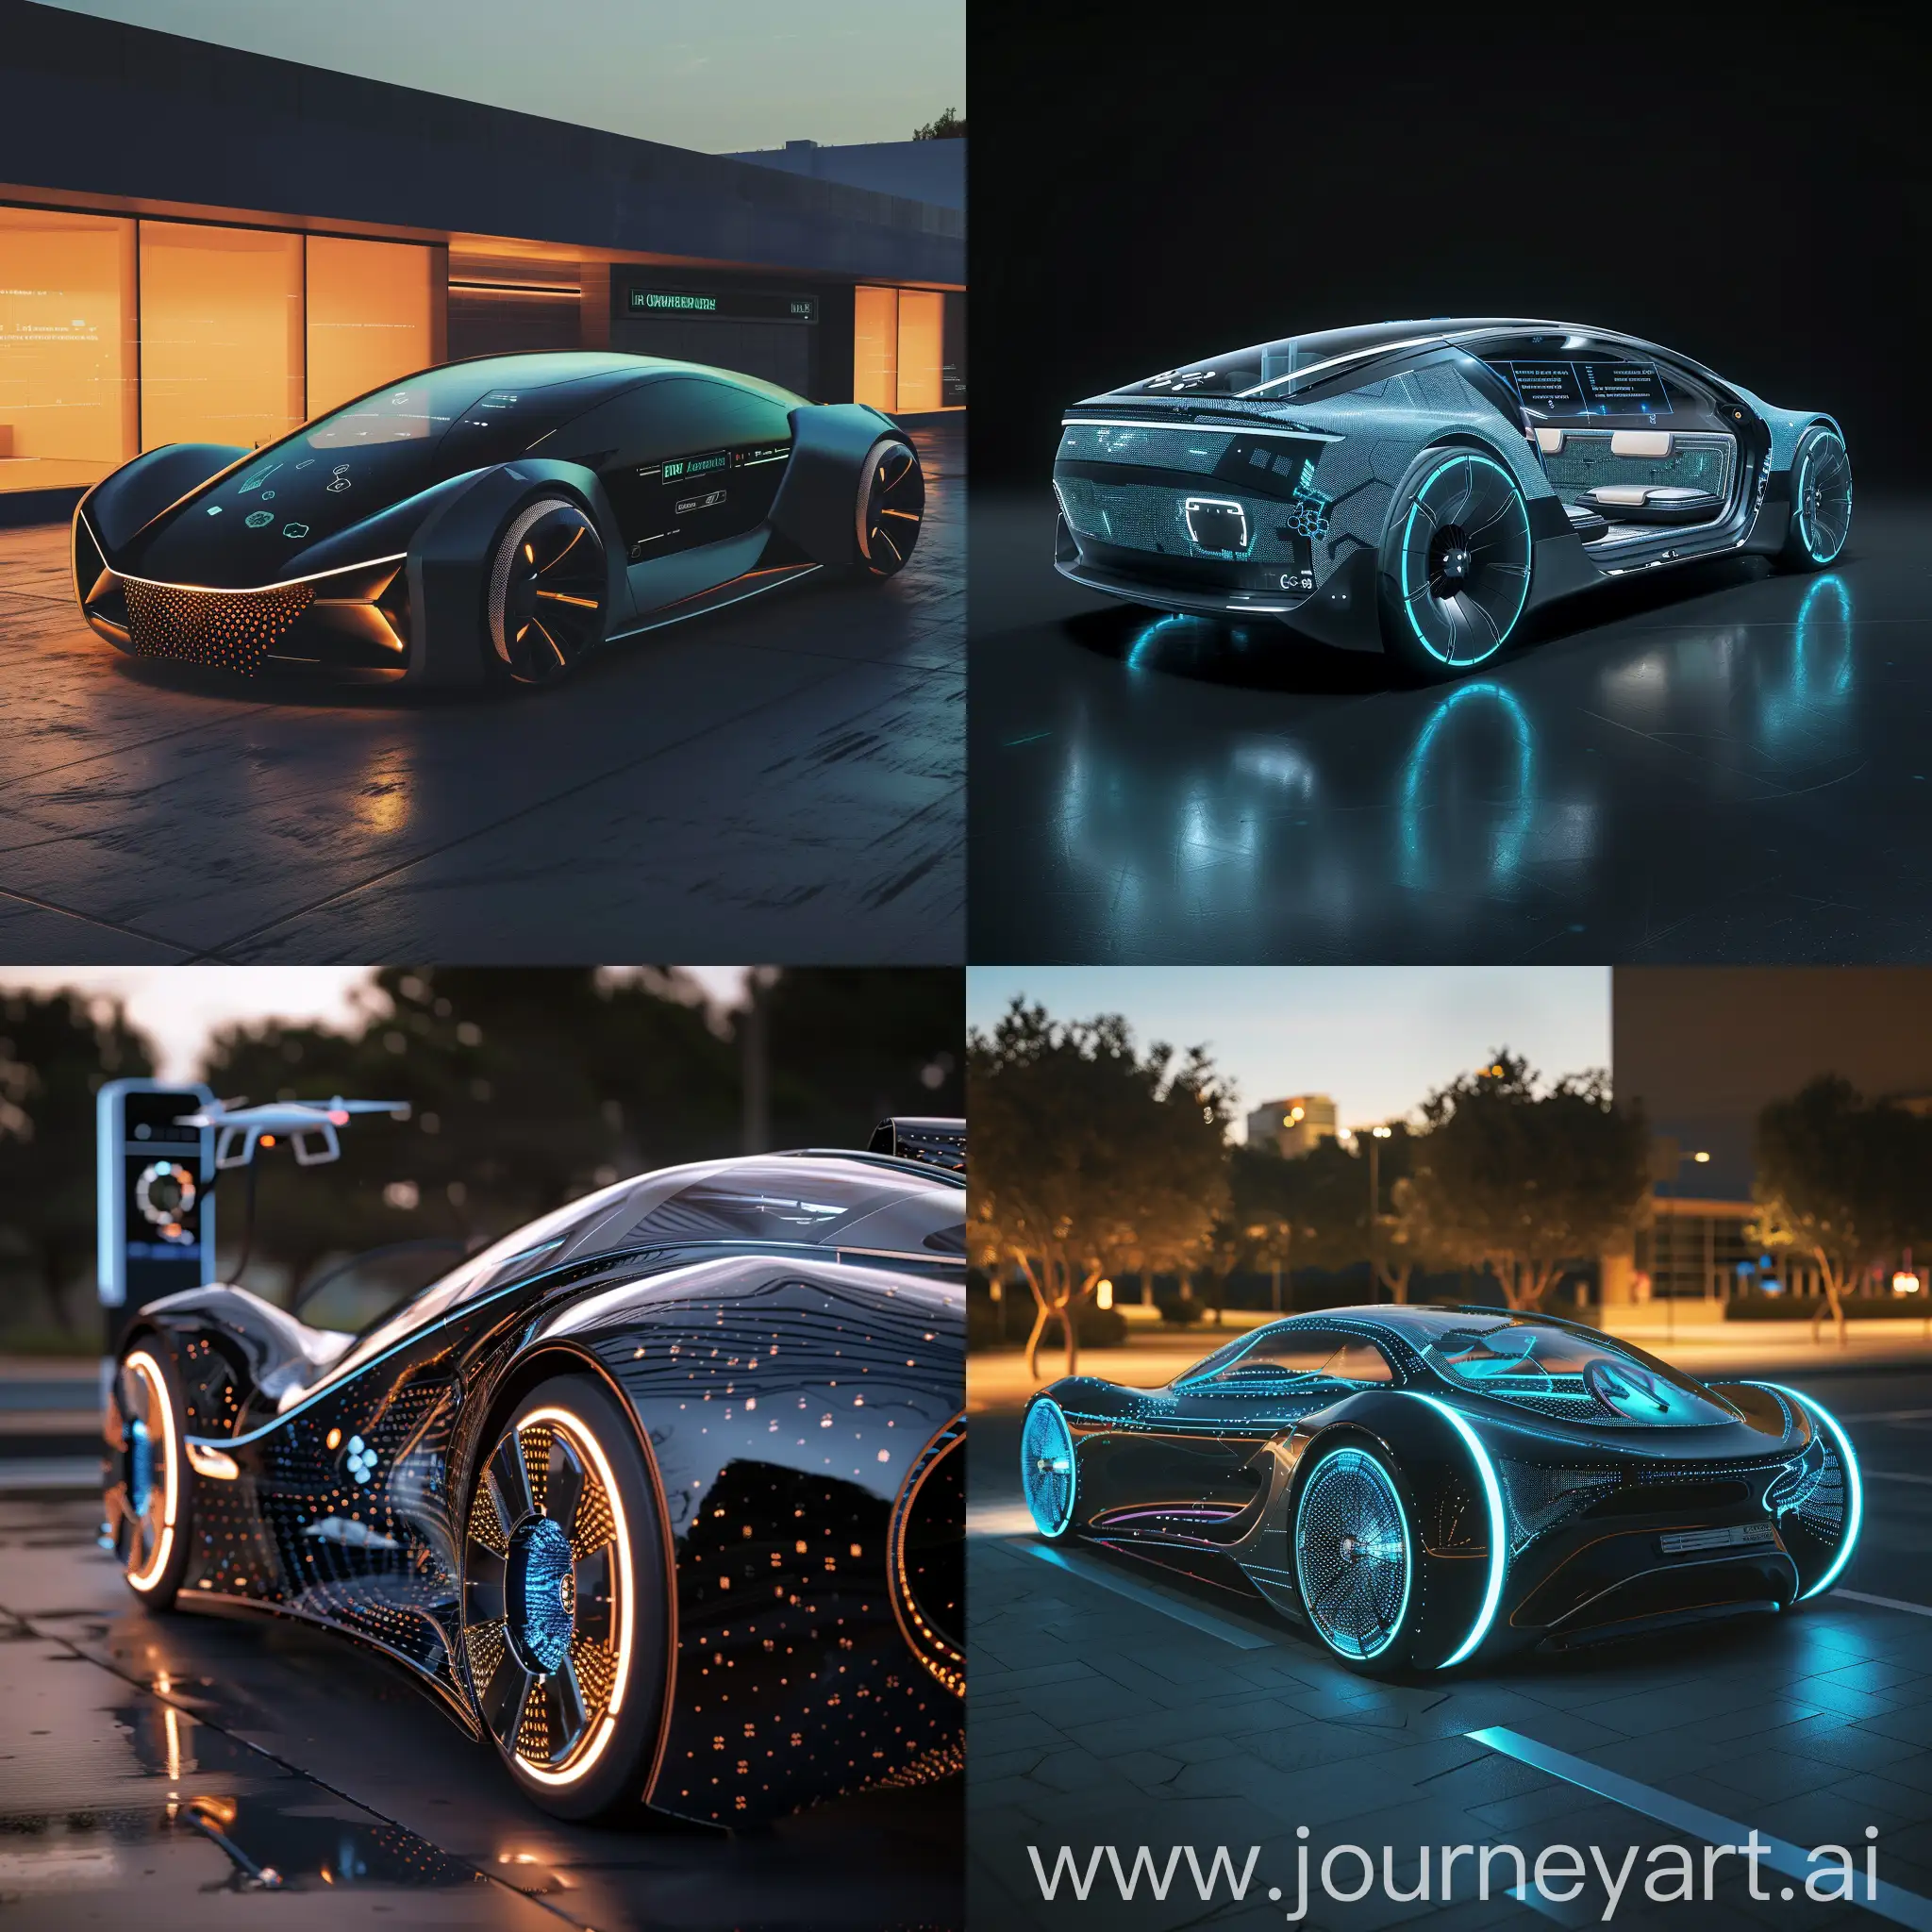 Futuristic-Electric-Vehicle-with-Advanced-Materials-and-AI-Integration